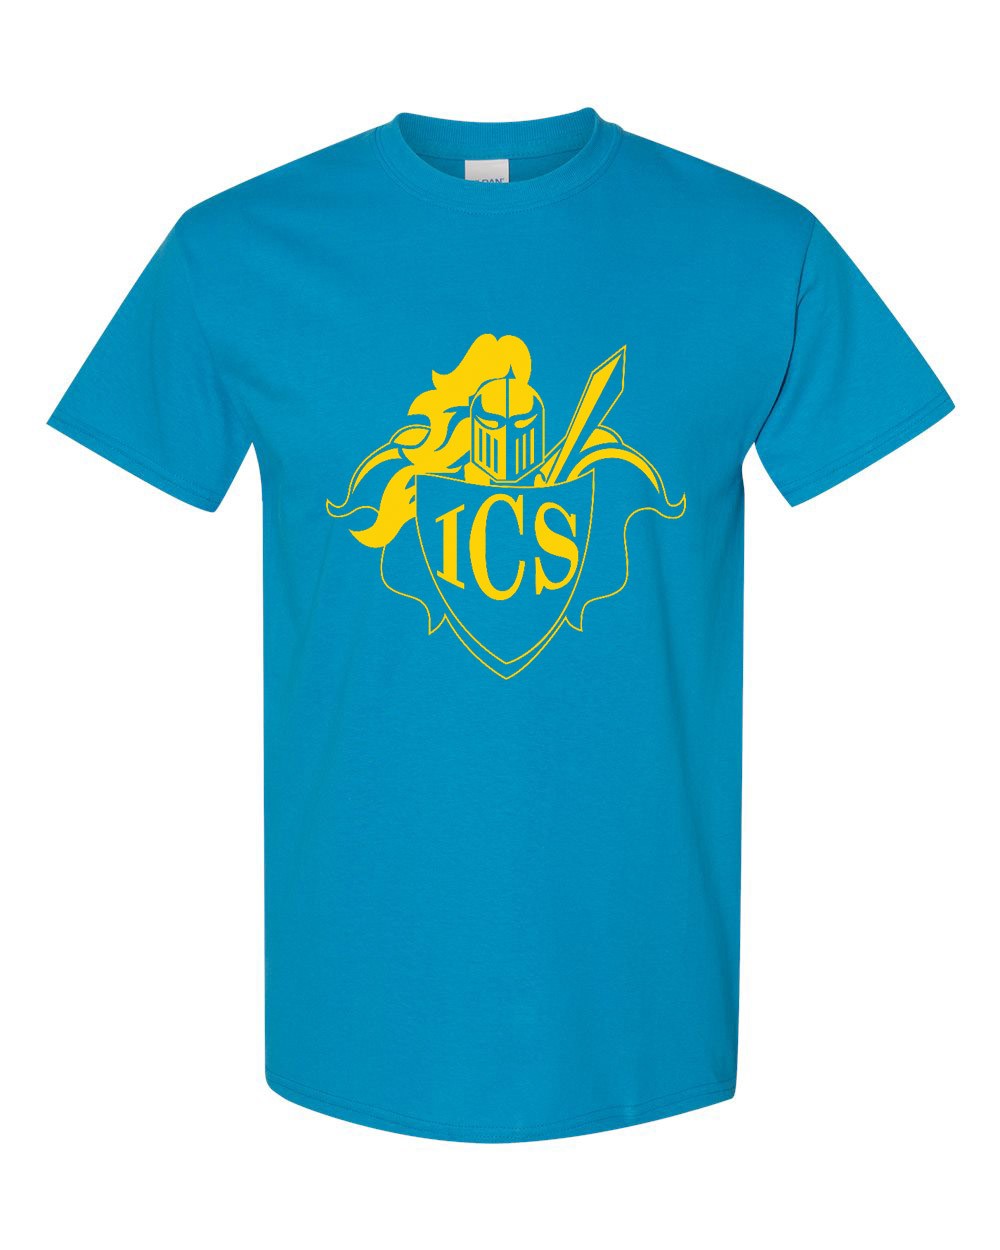 ICS Staff S/S T-Shirt w/ Yellow Logo #F1 - Please Allow 2-3 Weeks for Delivery